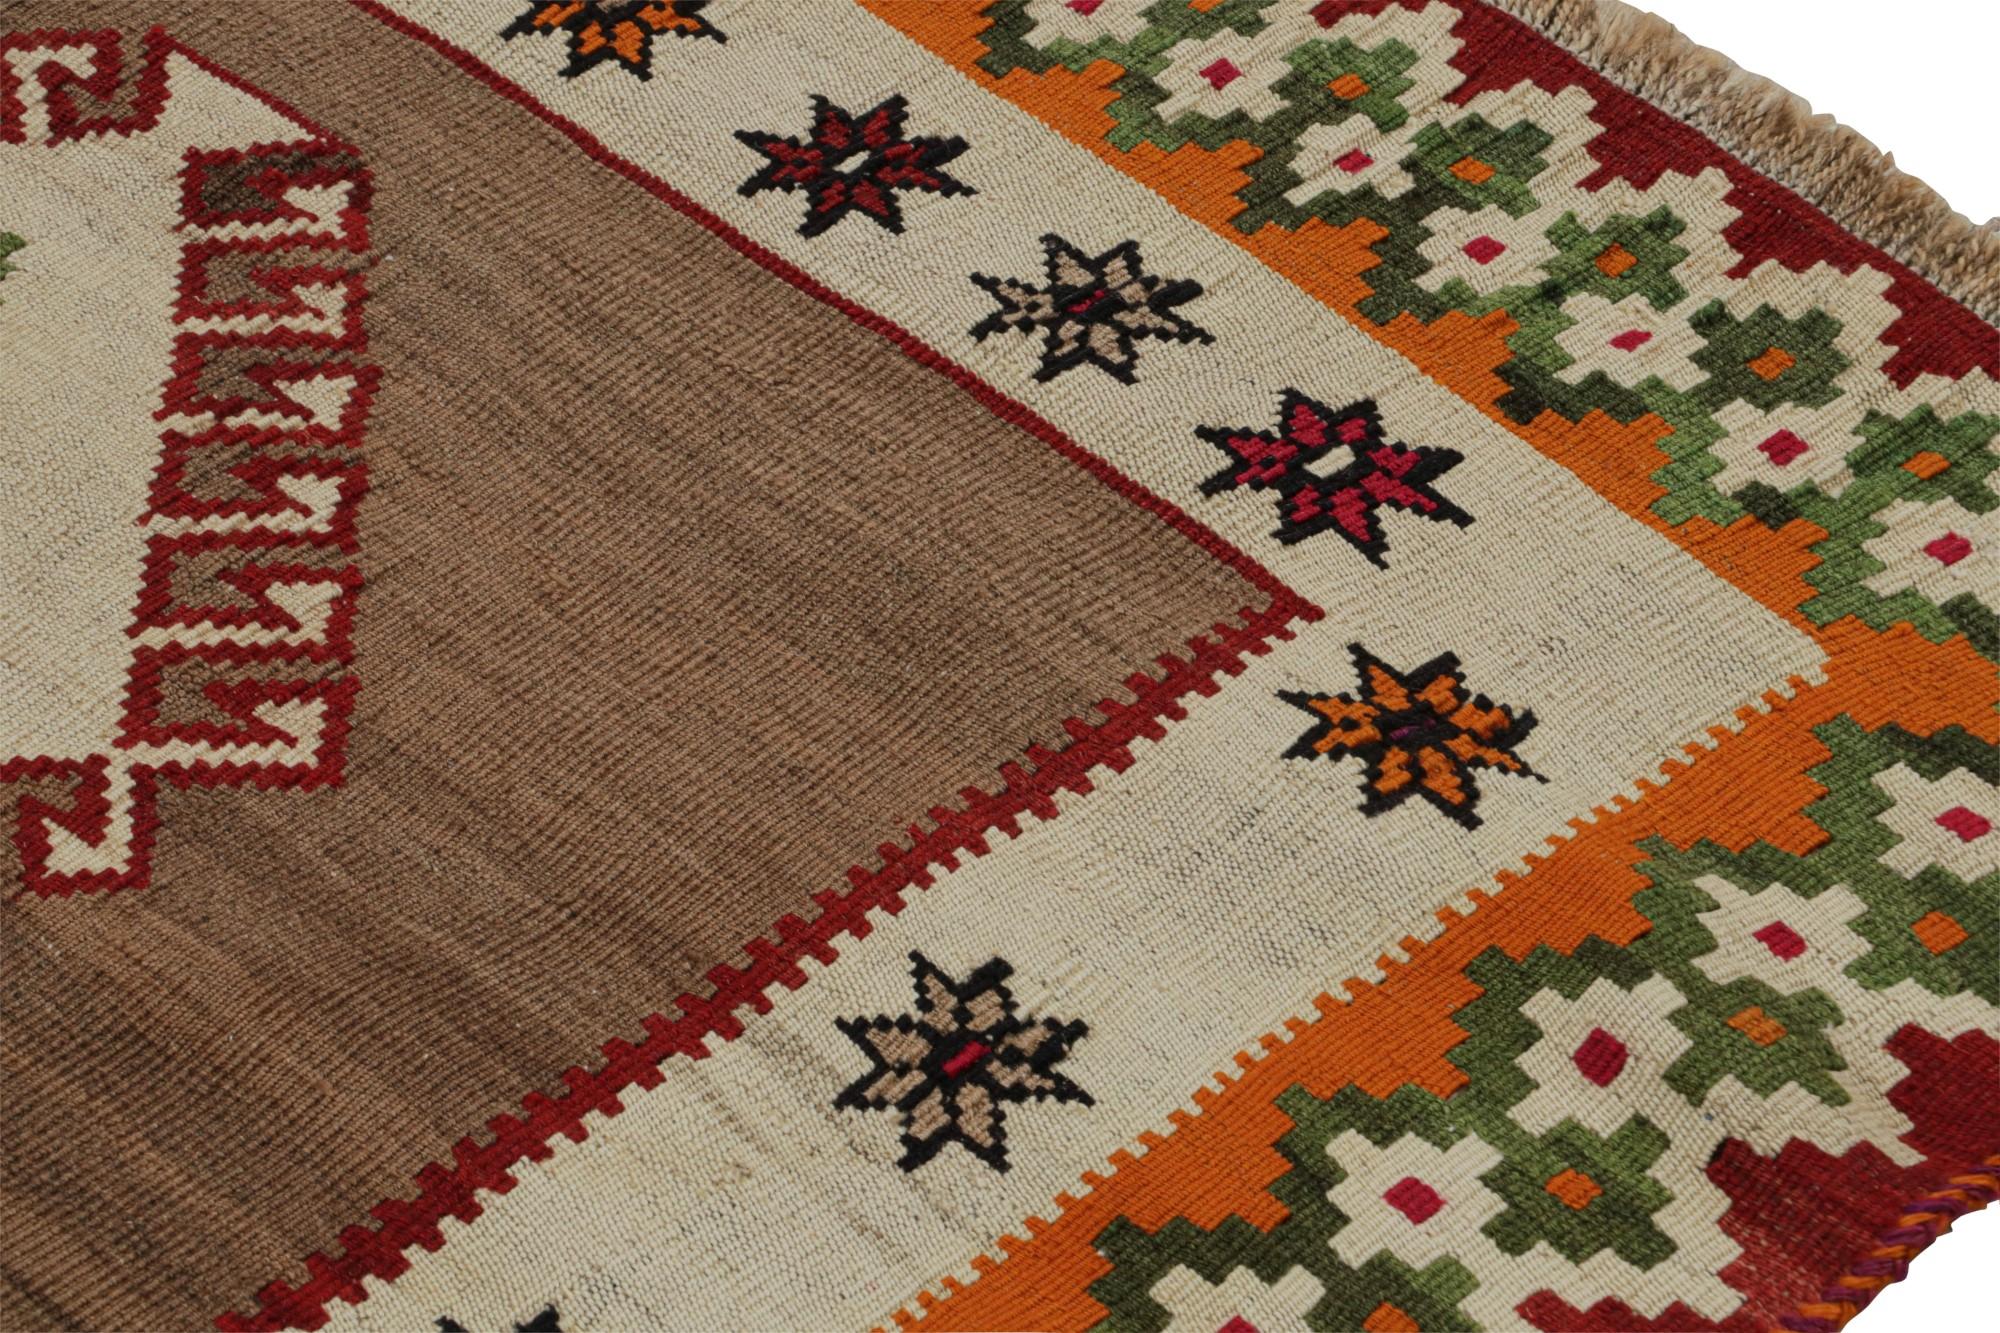 Handwoven in wool, circa 1950-1960, this 4x8 vintage tribal Afghan kilim rug features vibrant medallions and geometric patterns in beige/brown, green, blue and red. 

On the Design:

A special piece in the Rug & Kilim collection, this rug showcases